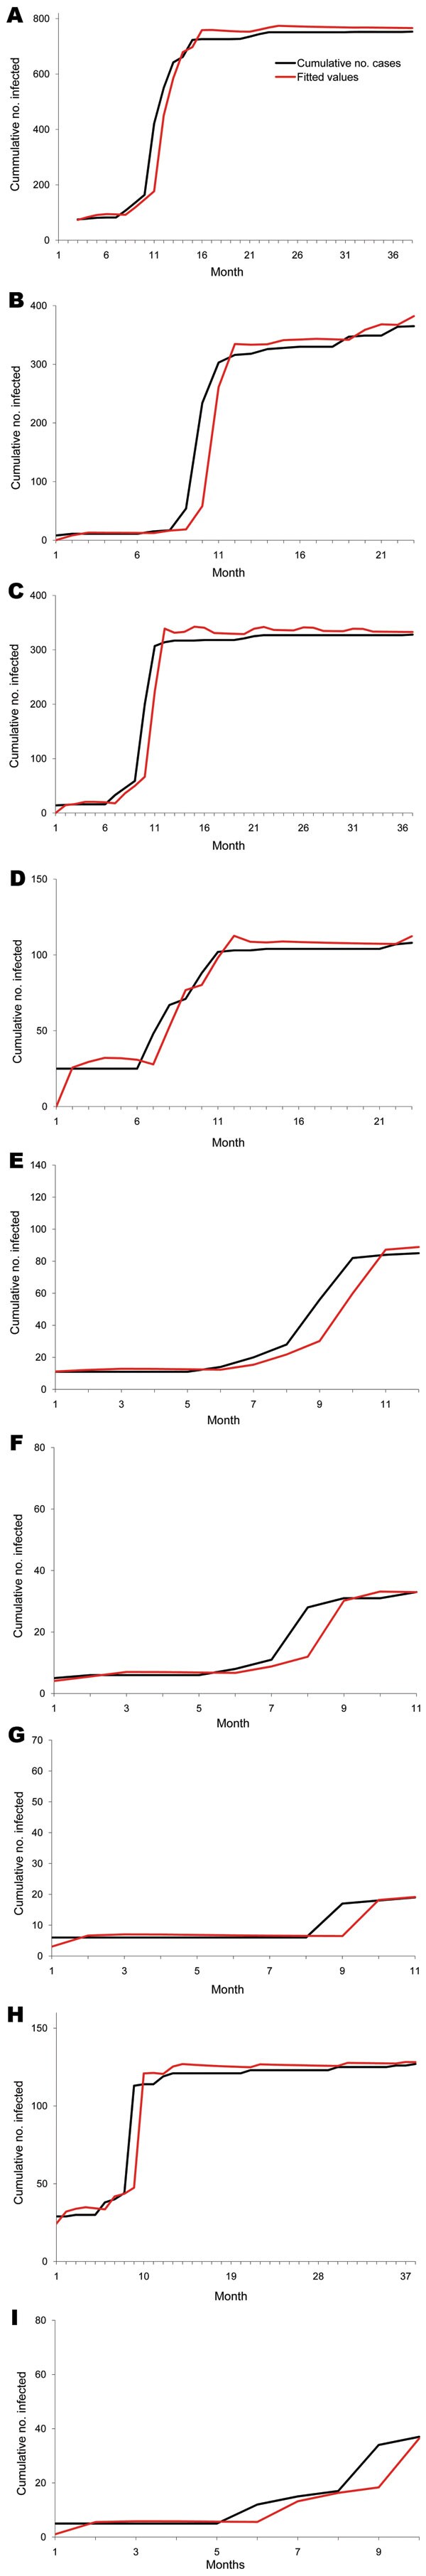 Outbreak data for highly pathogenic avian influenza (H5N1) infection in poultry, 2004–2007, Thailand. The cumulative number of cases and the fitted values were obtained by using the Burr XII model in the 9 regions.